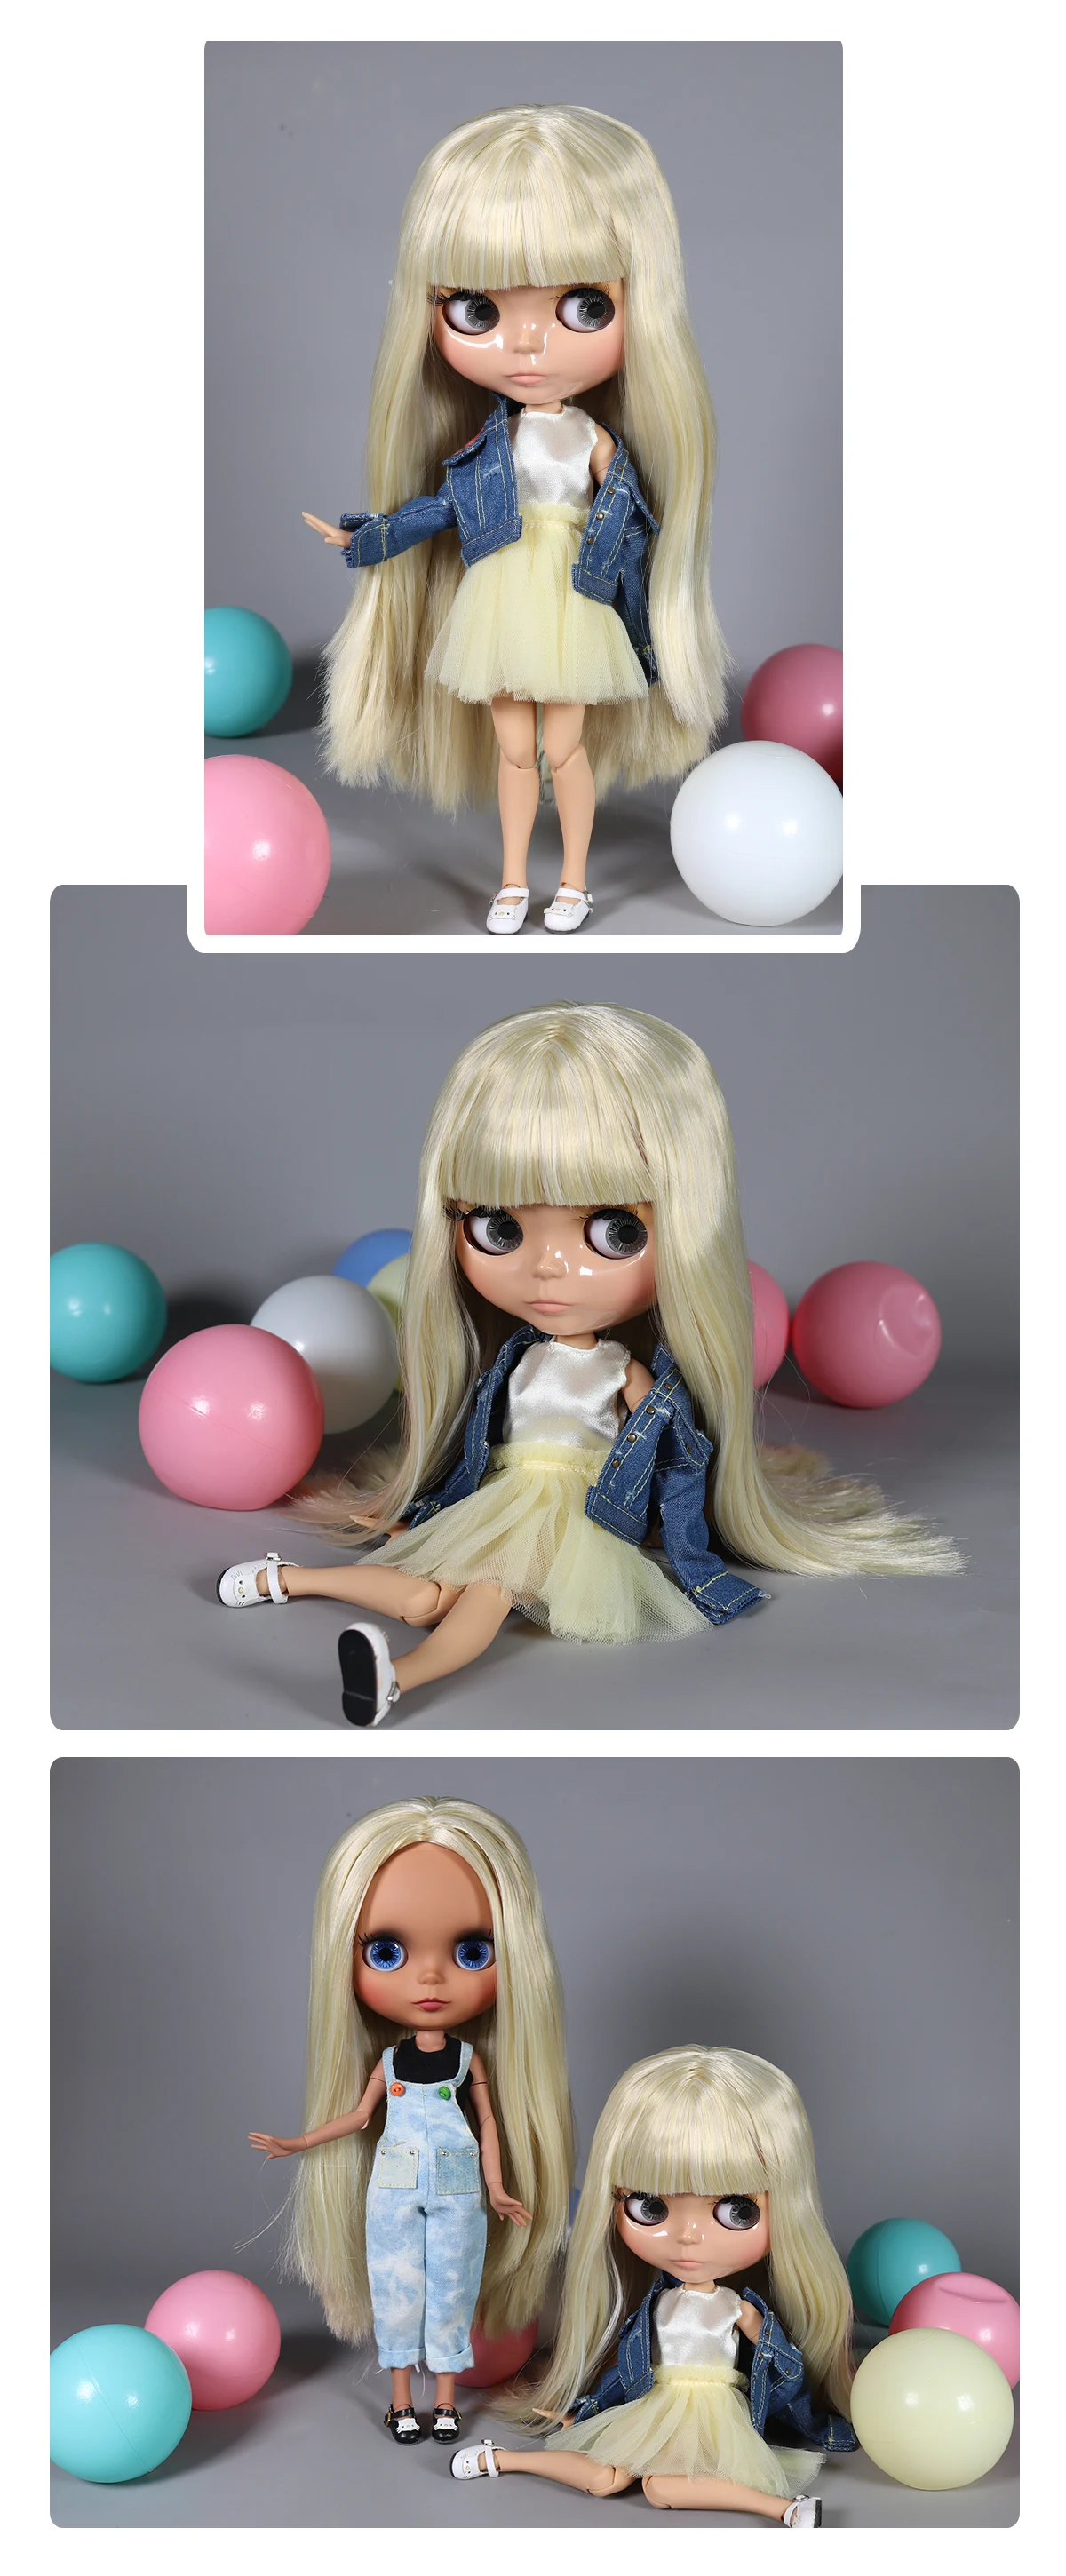 Neo Blythe Doll with Blonde Hair, Tan Skin, Shiny Cute Face & Factory Jointed Body 1